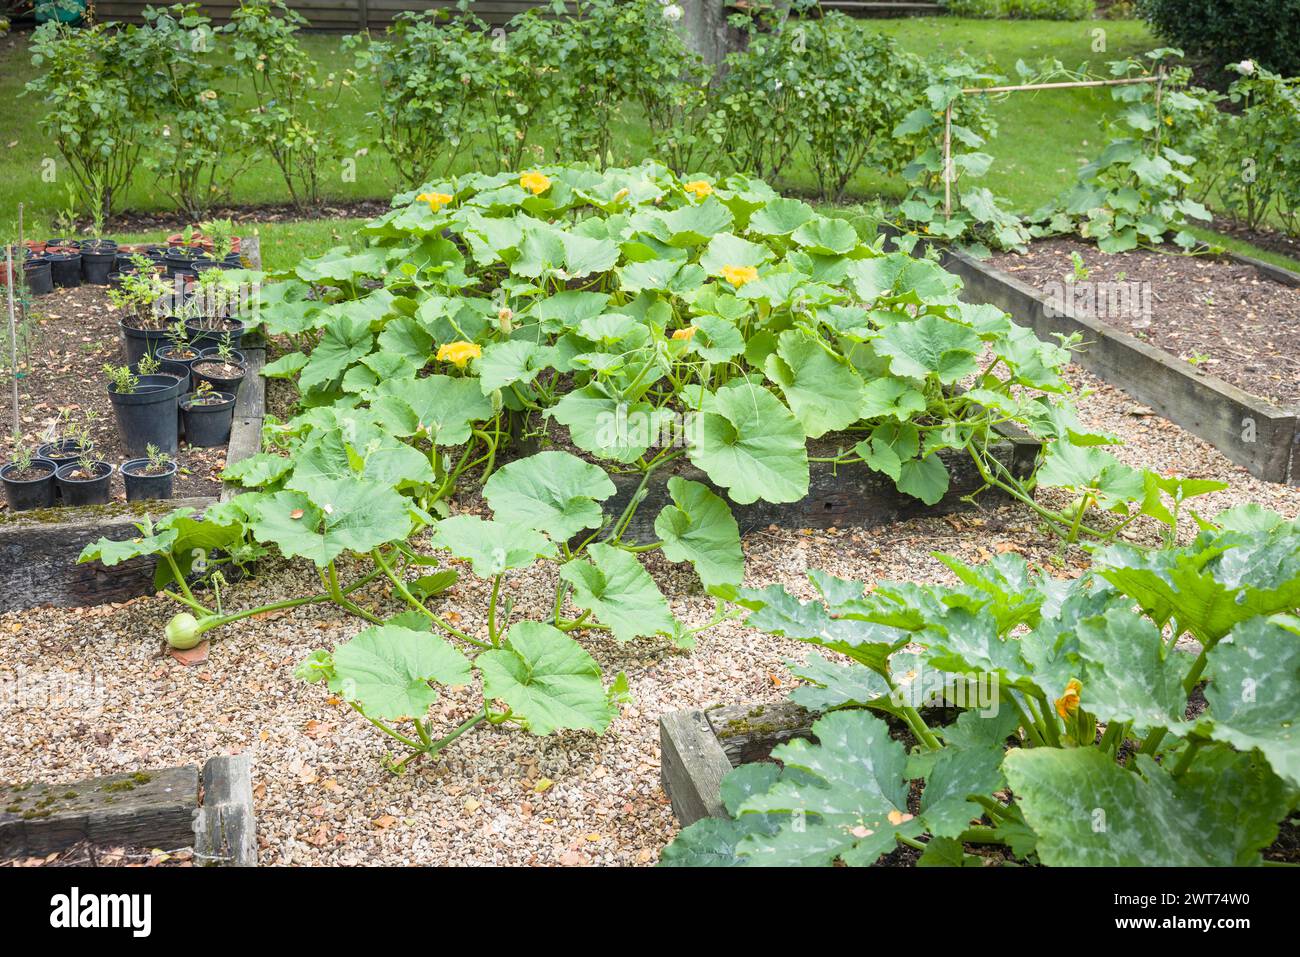 Vegetables (winter squash Crown Prince) growing in a raised bed in a UK garden in summer Stock Photo